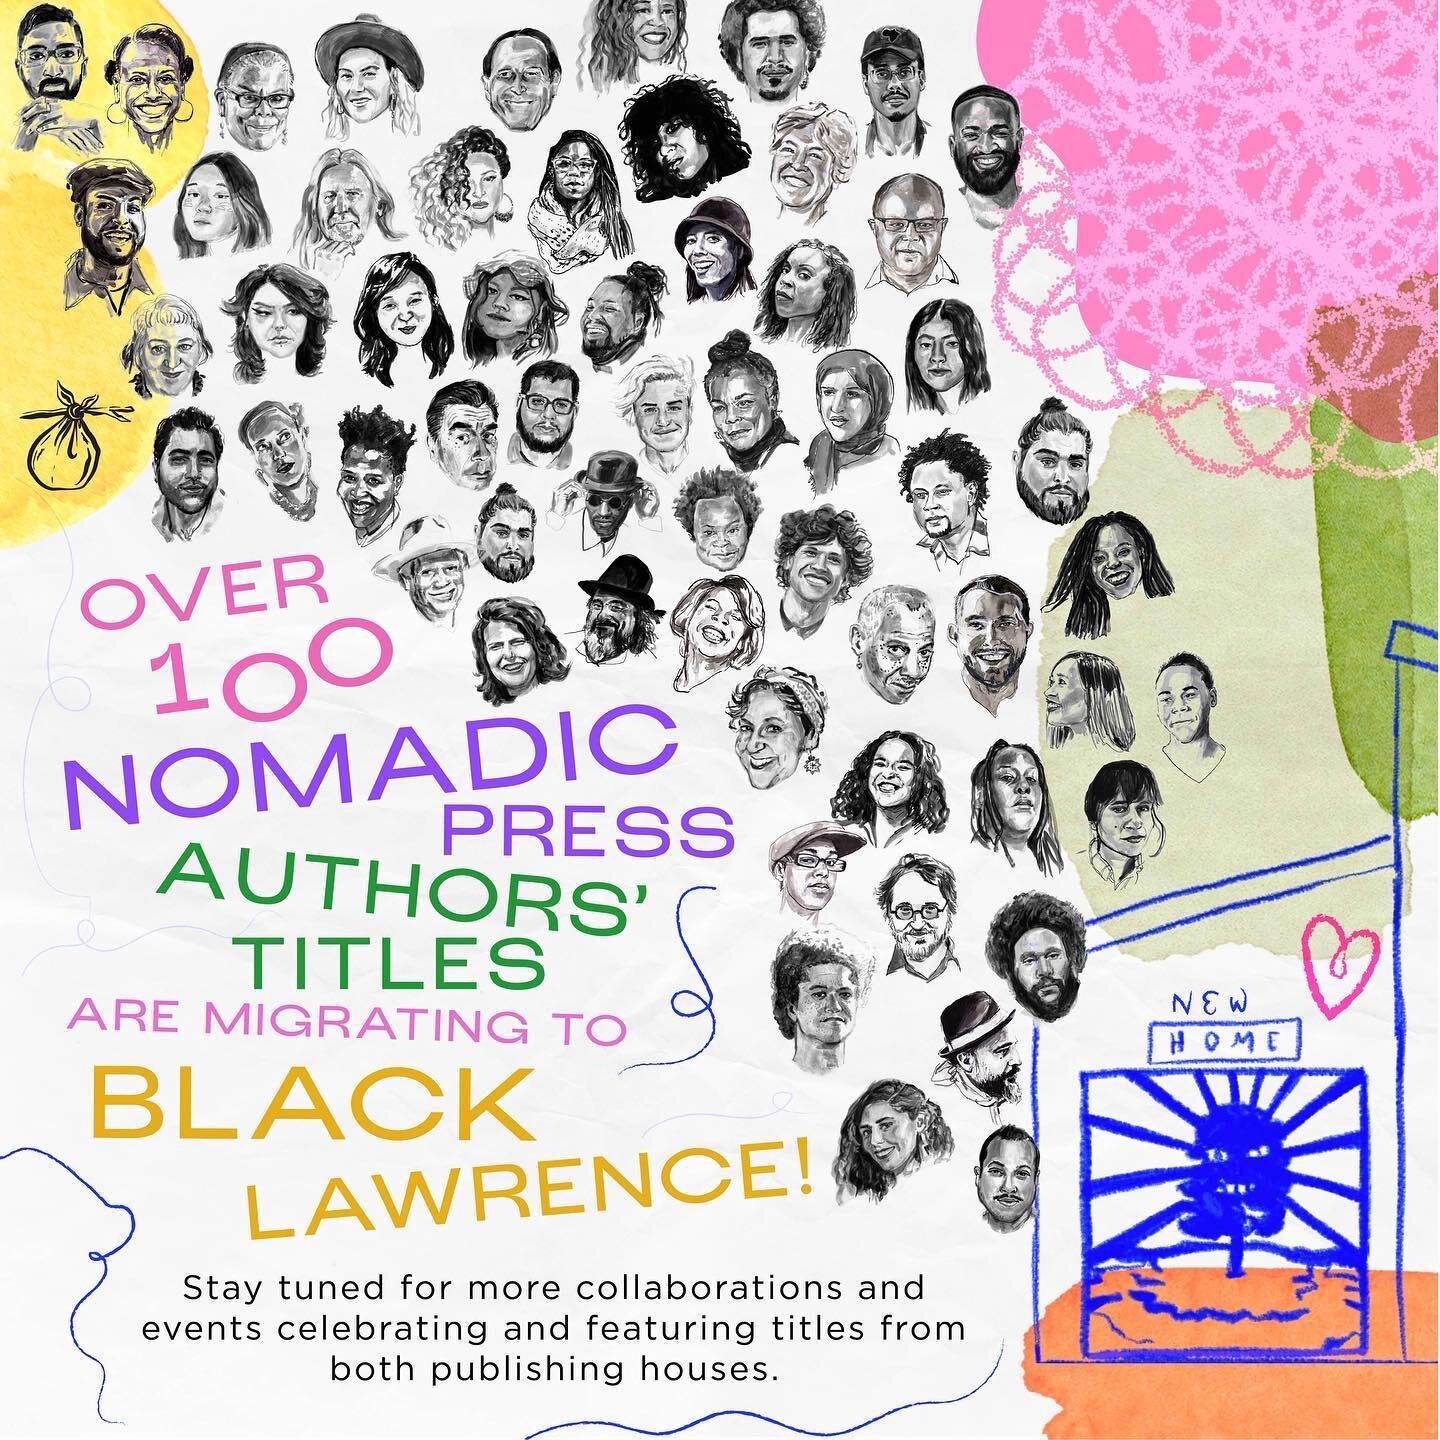 Over 100 Nomadic Press authors&rsquo; titles are migrating to Black Lawrence Press! Stay tuned for more collaborations and events celebrating and featuring titles from both houses. [note the portrait collection is not meant to be comprehensive of eve